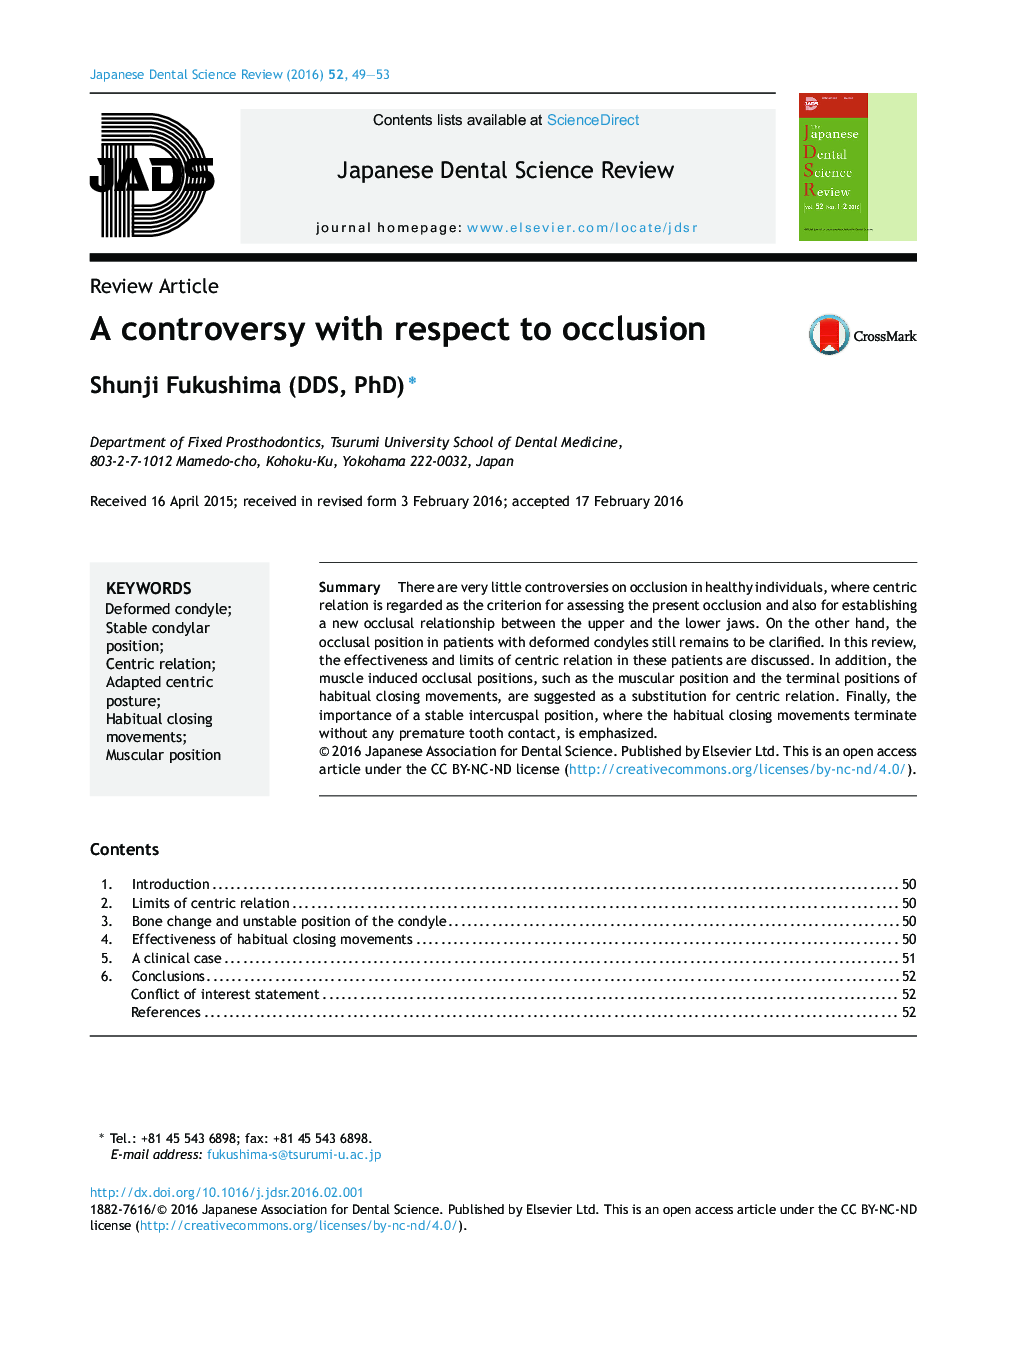 A controversy with respect to occlusion